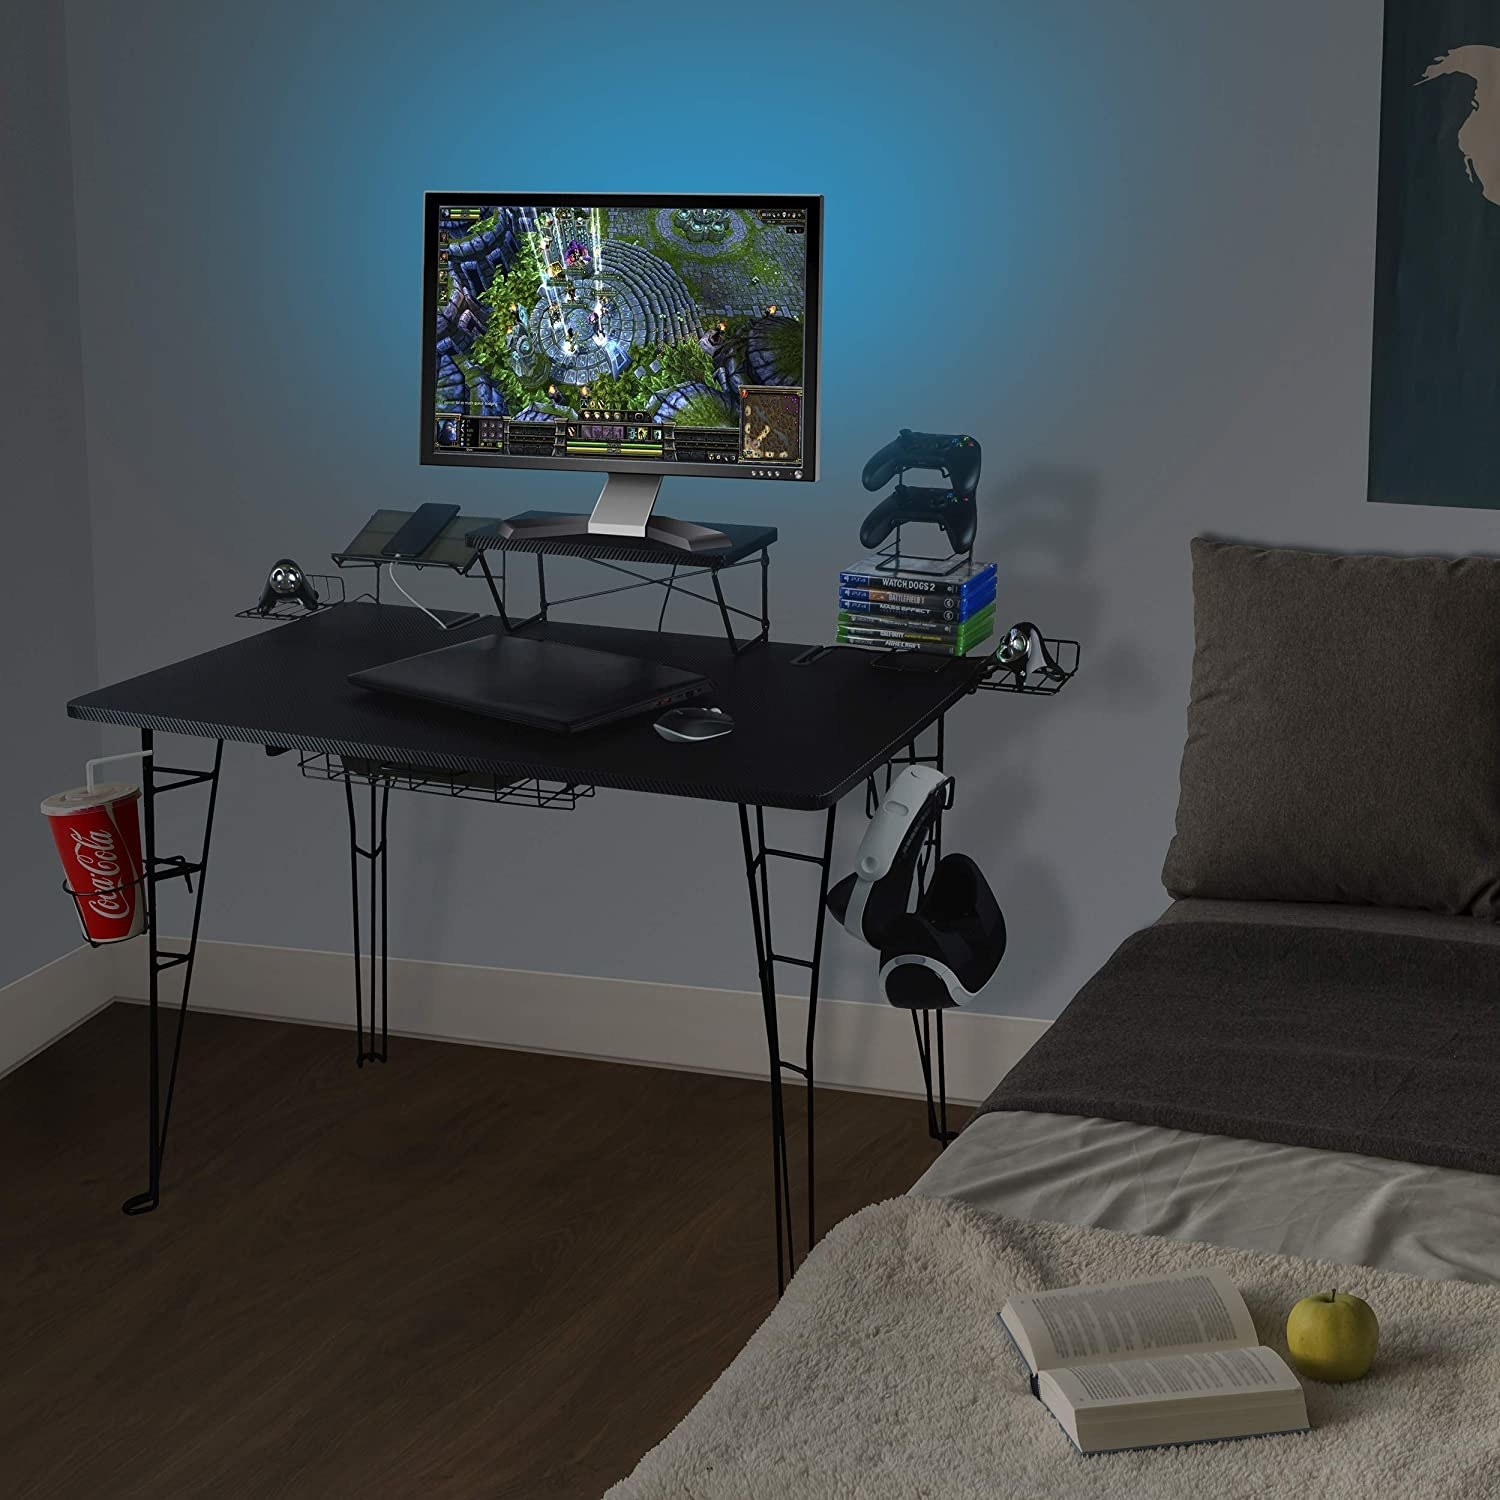 The gaming desk in a bedroom with several games and accessories on it